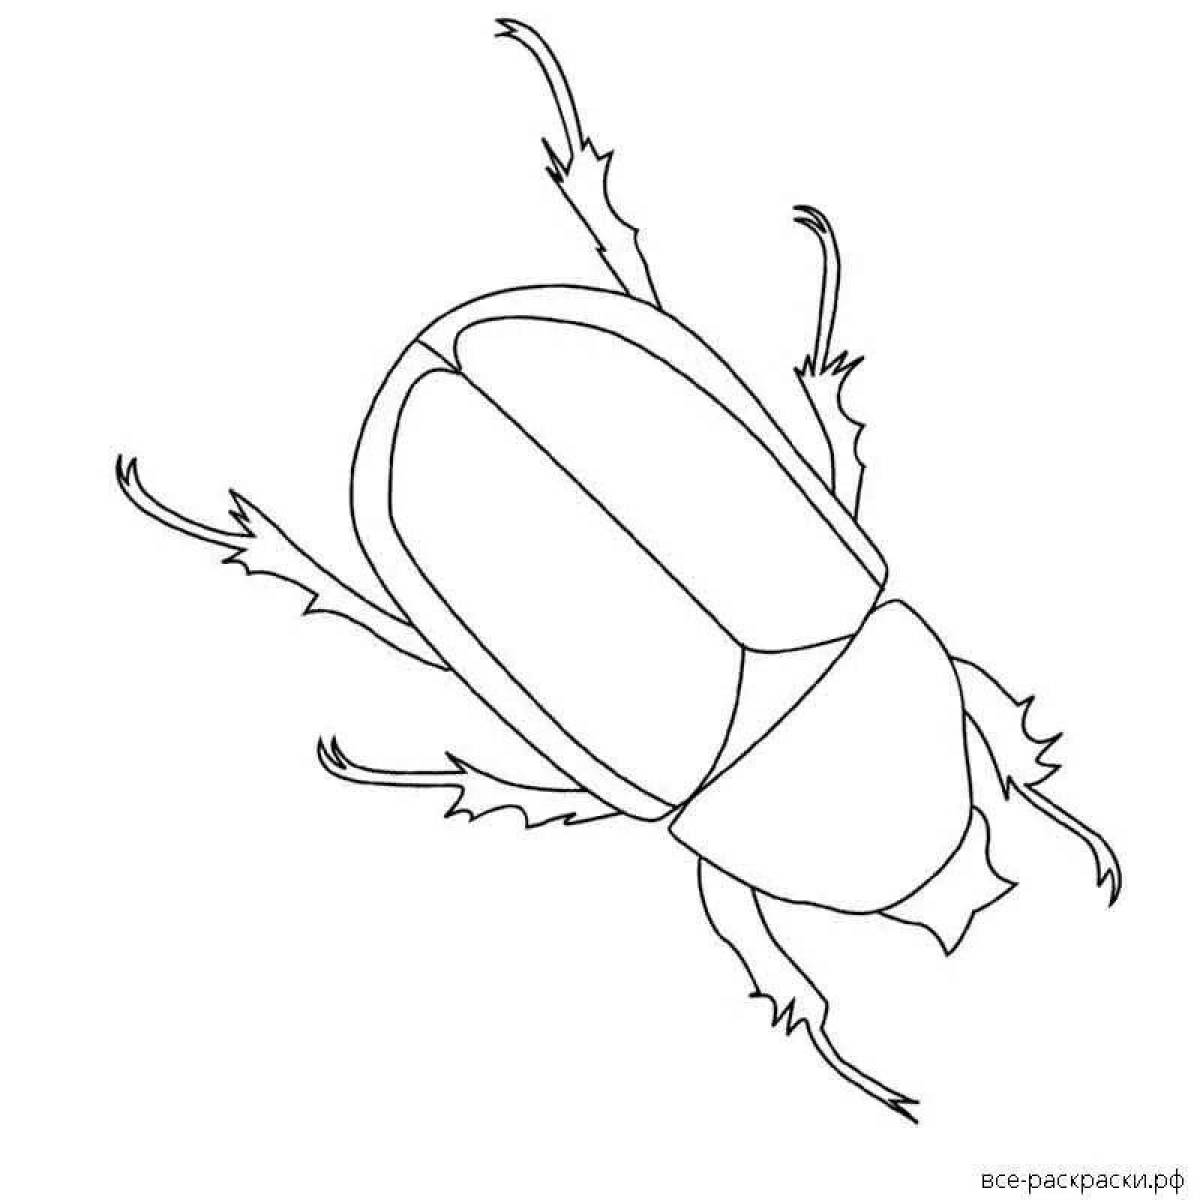 An unforgettable beetle coloring book for kids